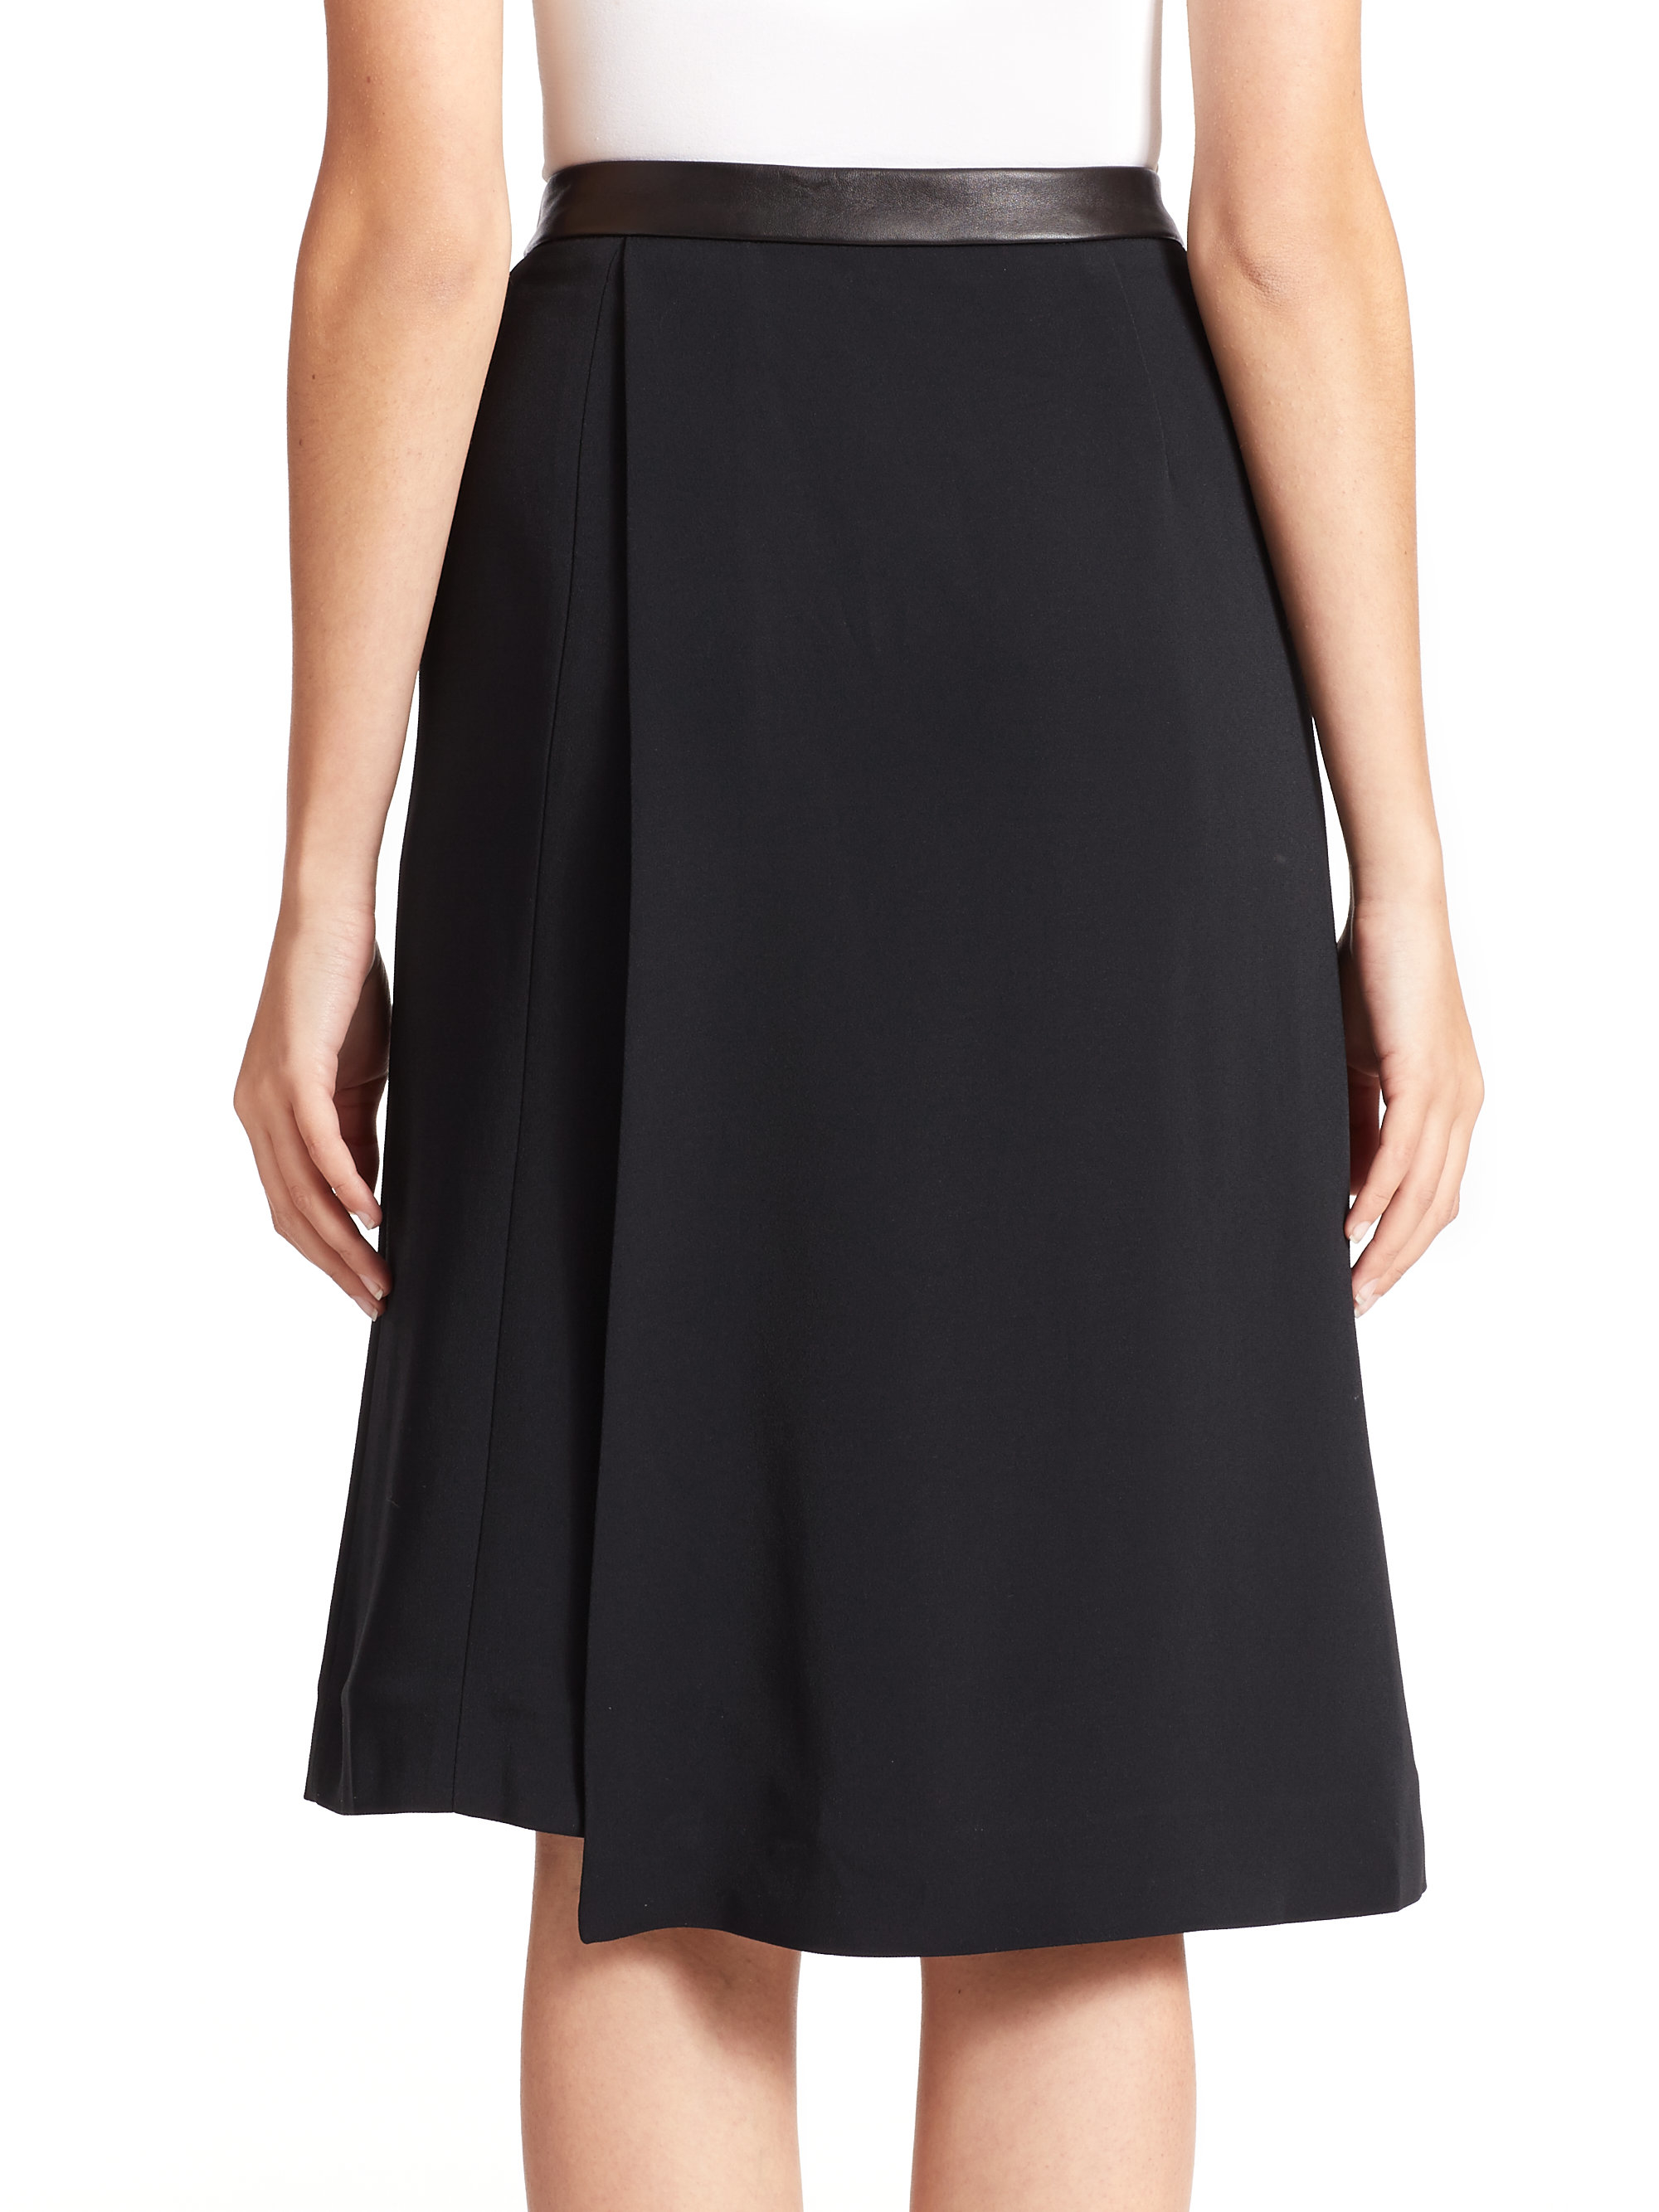 Narciso rodriguez Leather-trimmed Half Skirt in Black | Lyst